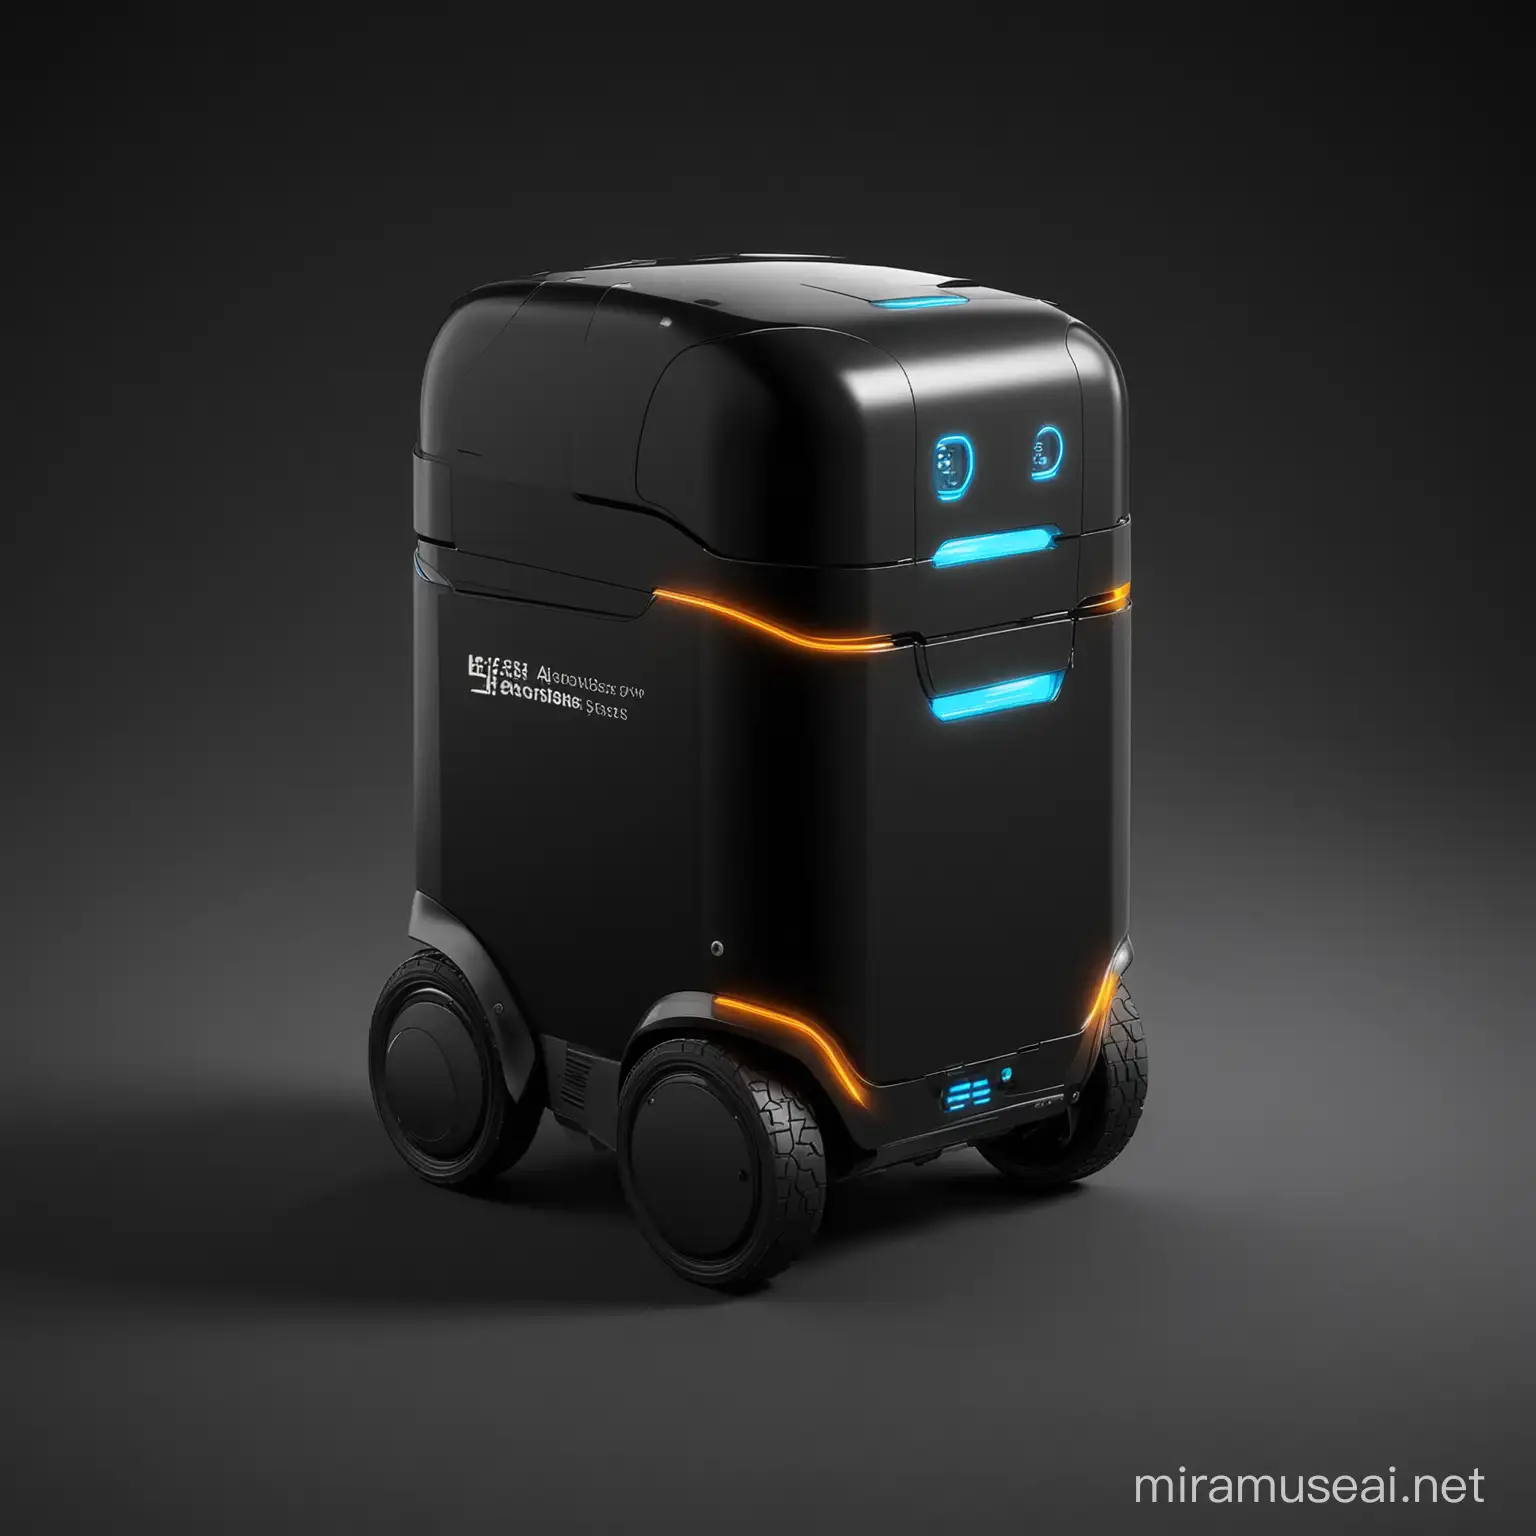 generate me a design with a black background for an autonomous parcel delivery machine/robot that assists a delivery driver by making deliveries whilst on a run
